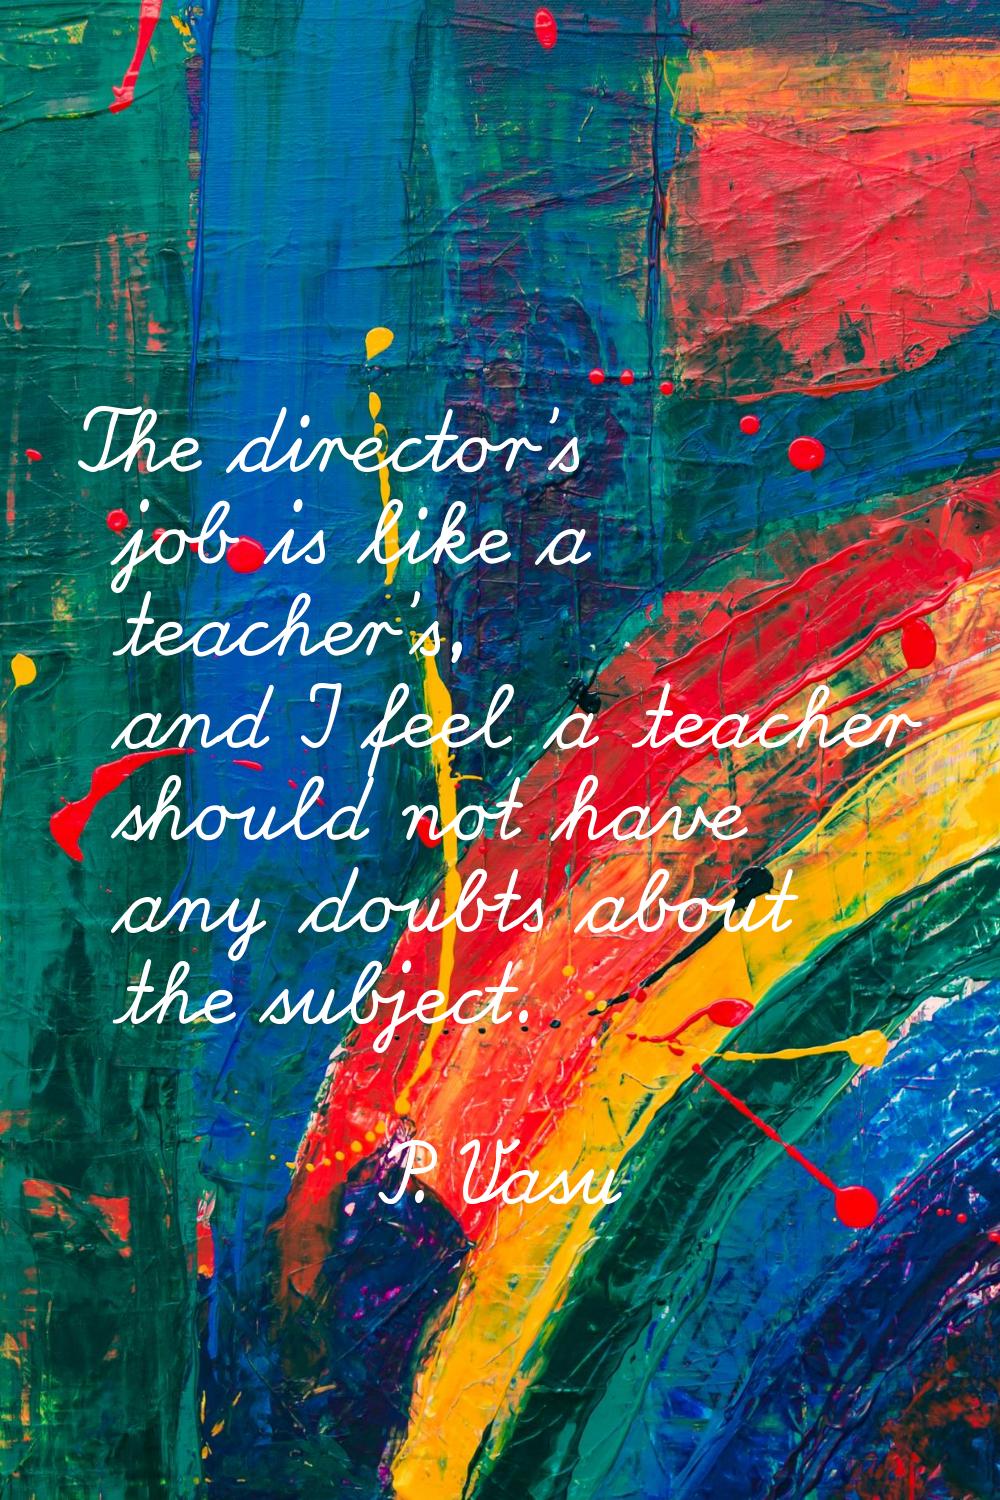 The director's job is like a teacher's, and I feel a teacher should not have any doubts about the s